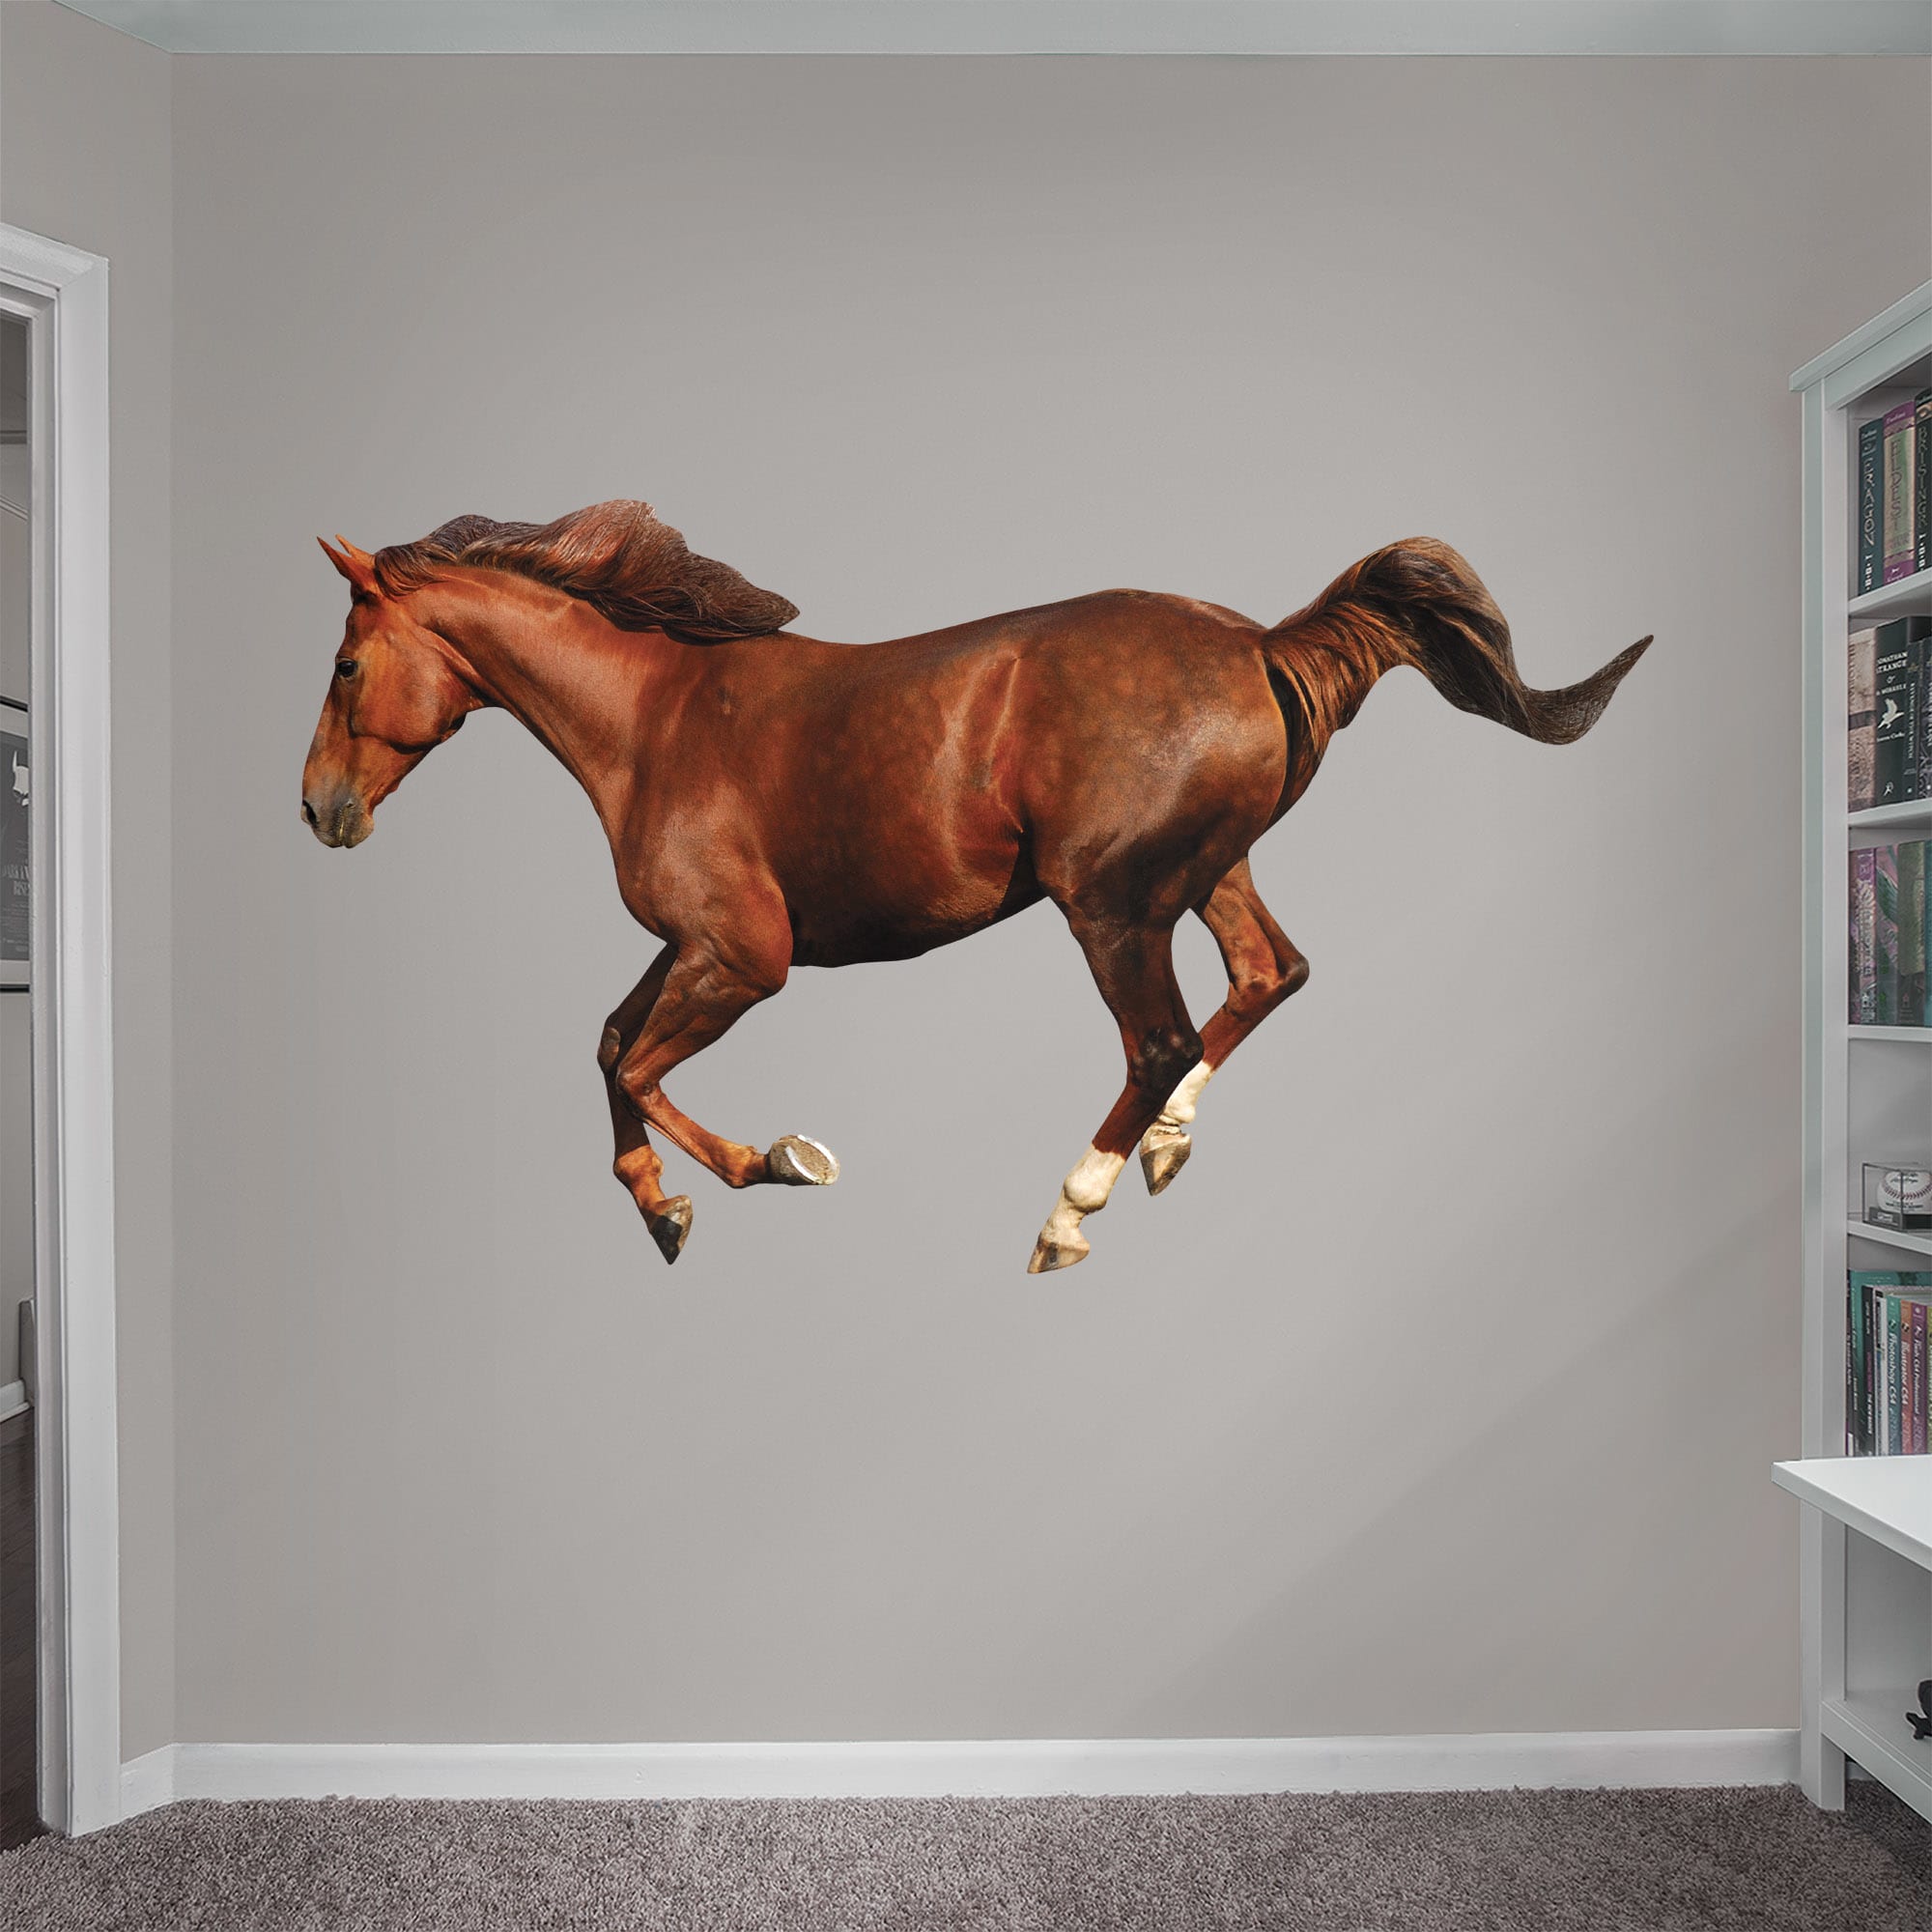 Horse - Removable Vinyl Decal Huge Animal + 2 Decals (77"W x 50"H) by Fathead